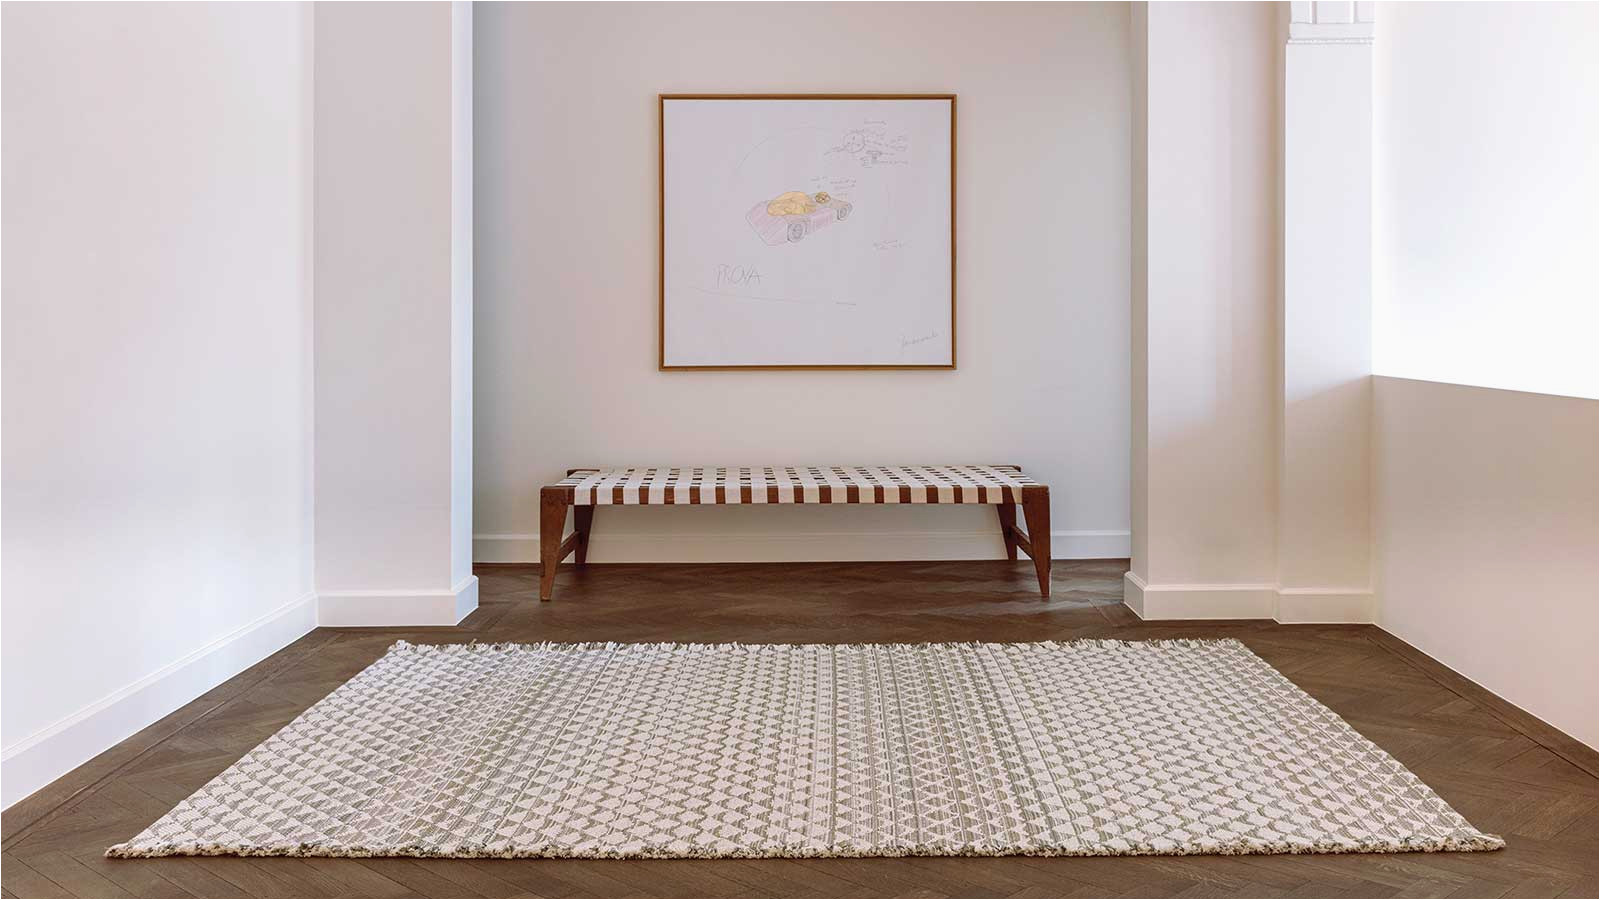 Wool Sisal Blend area Rugs Wool Rugs & Carpet Handloomed, Woven, Tufted and More …